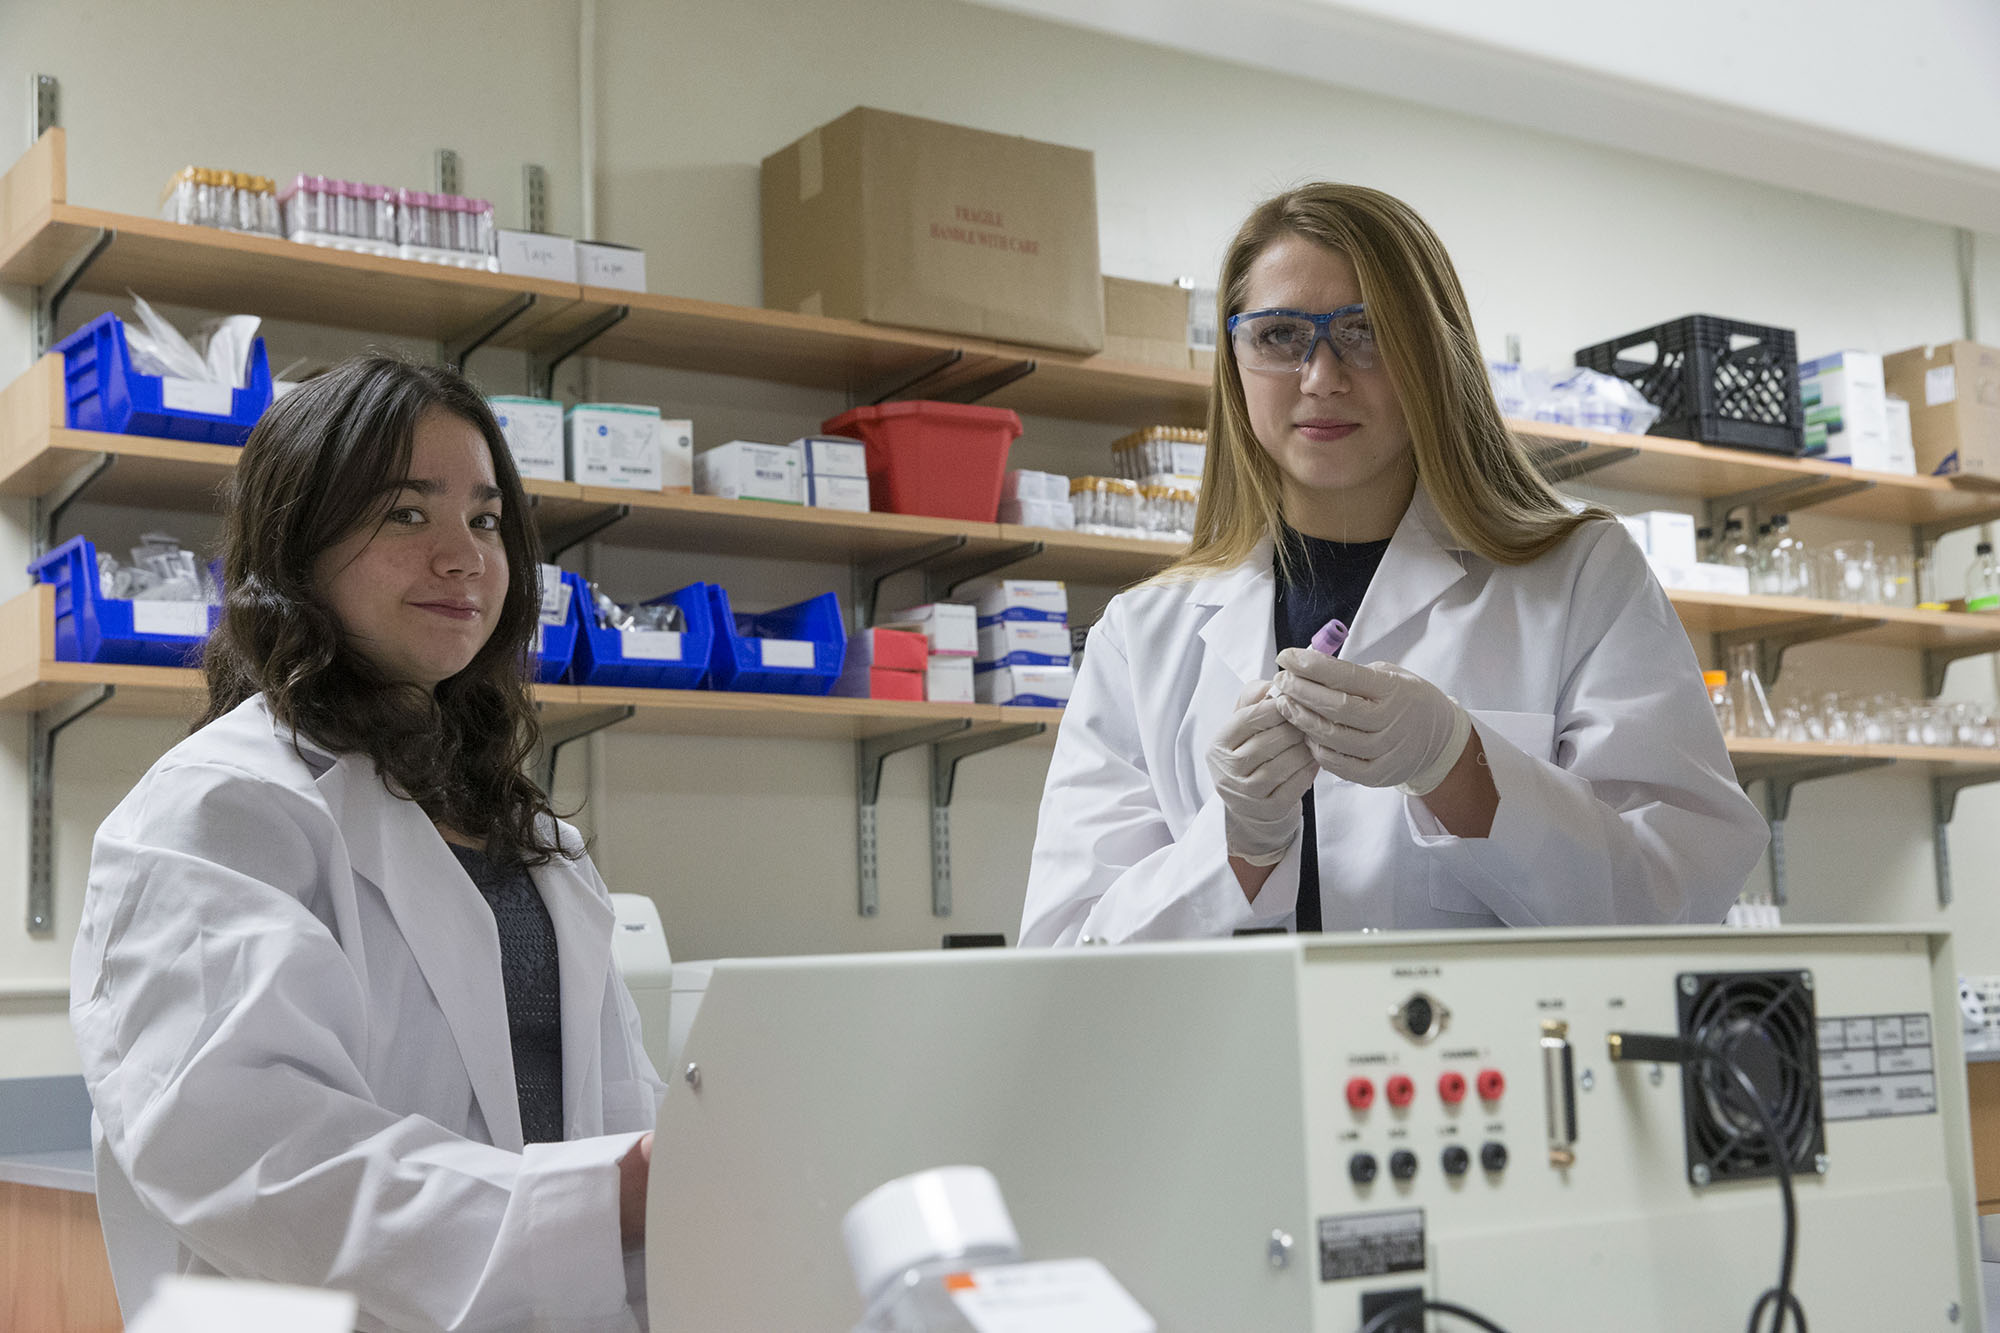 Jess Looby and Lily Berger smile at the camera as they work in a lab